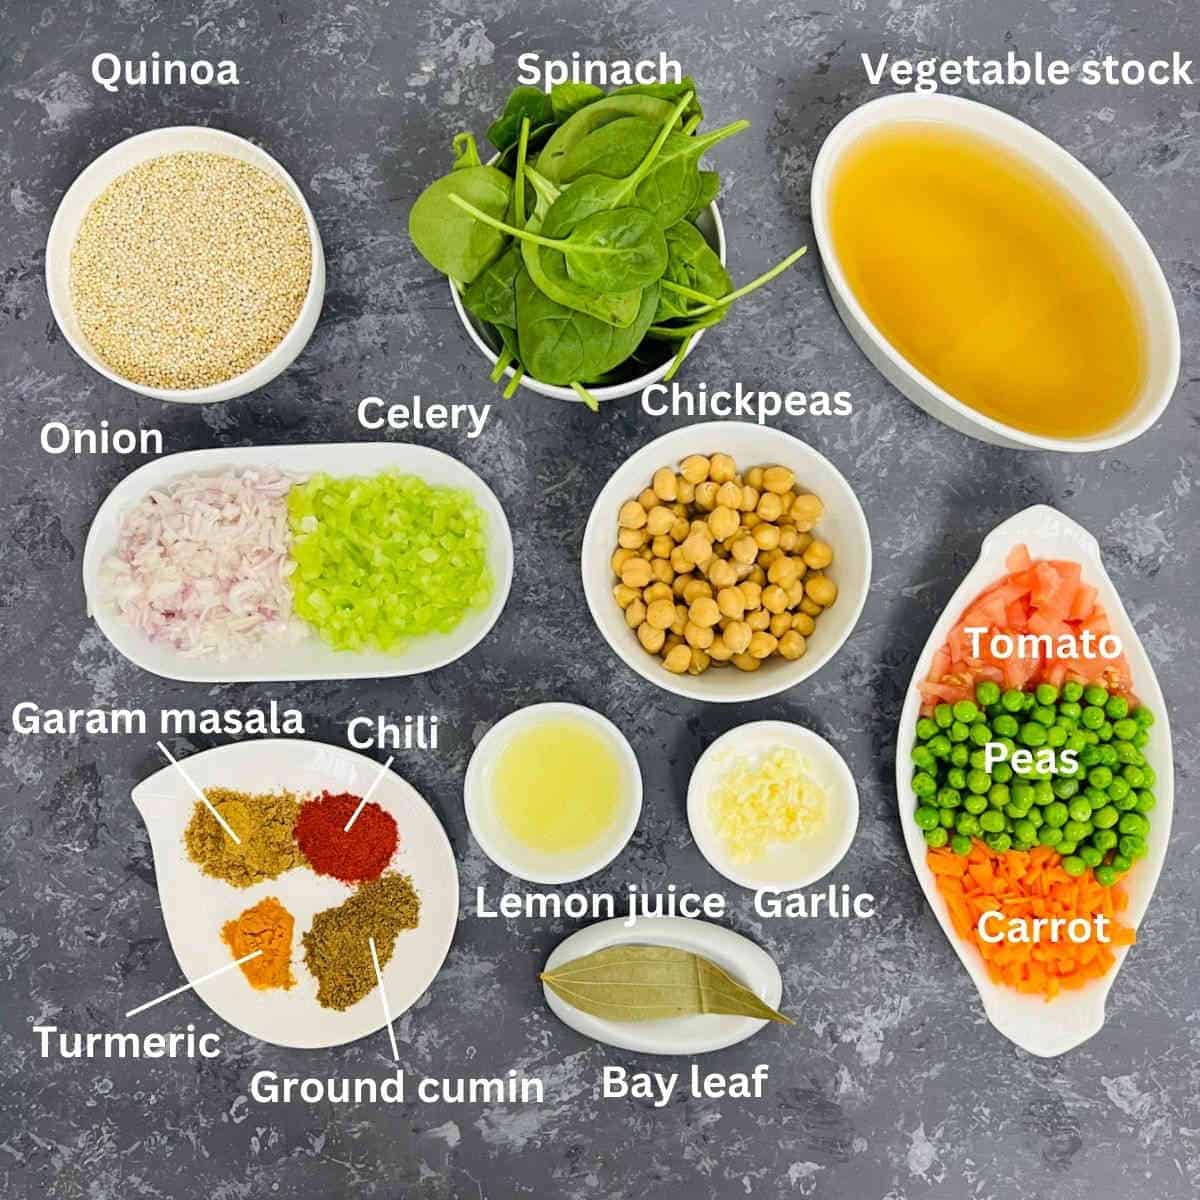 Quinoa soup ingredients placed on a grey surface.